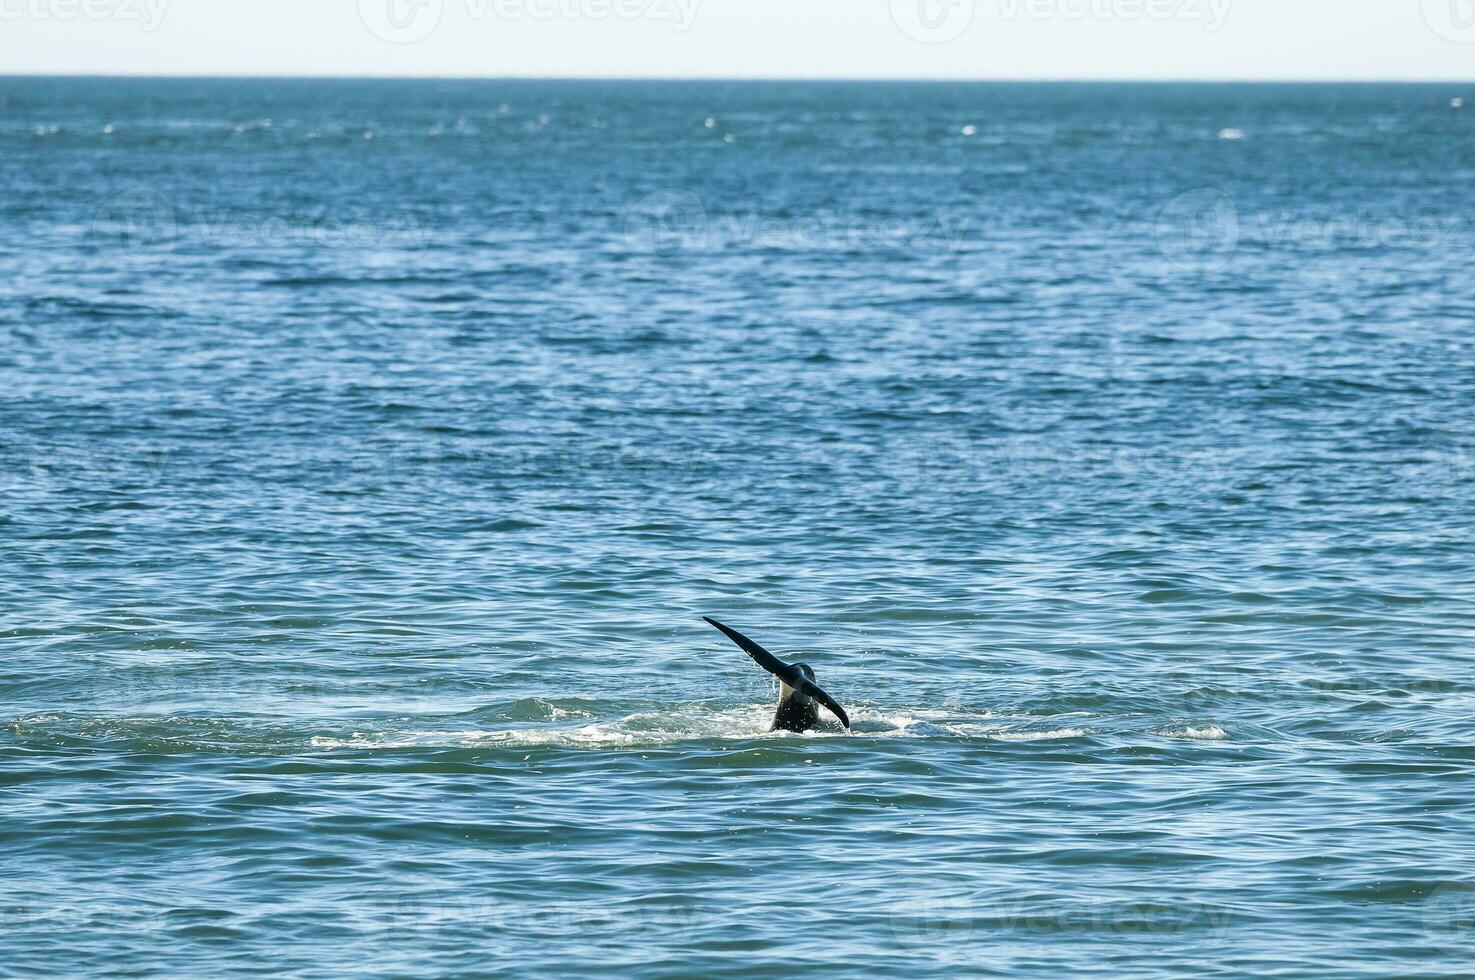 Killer whale hunting sea lions on the paragonian coast, Patagonia, Argentina photo